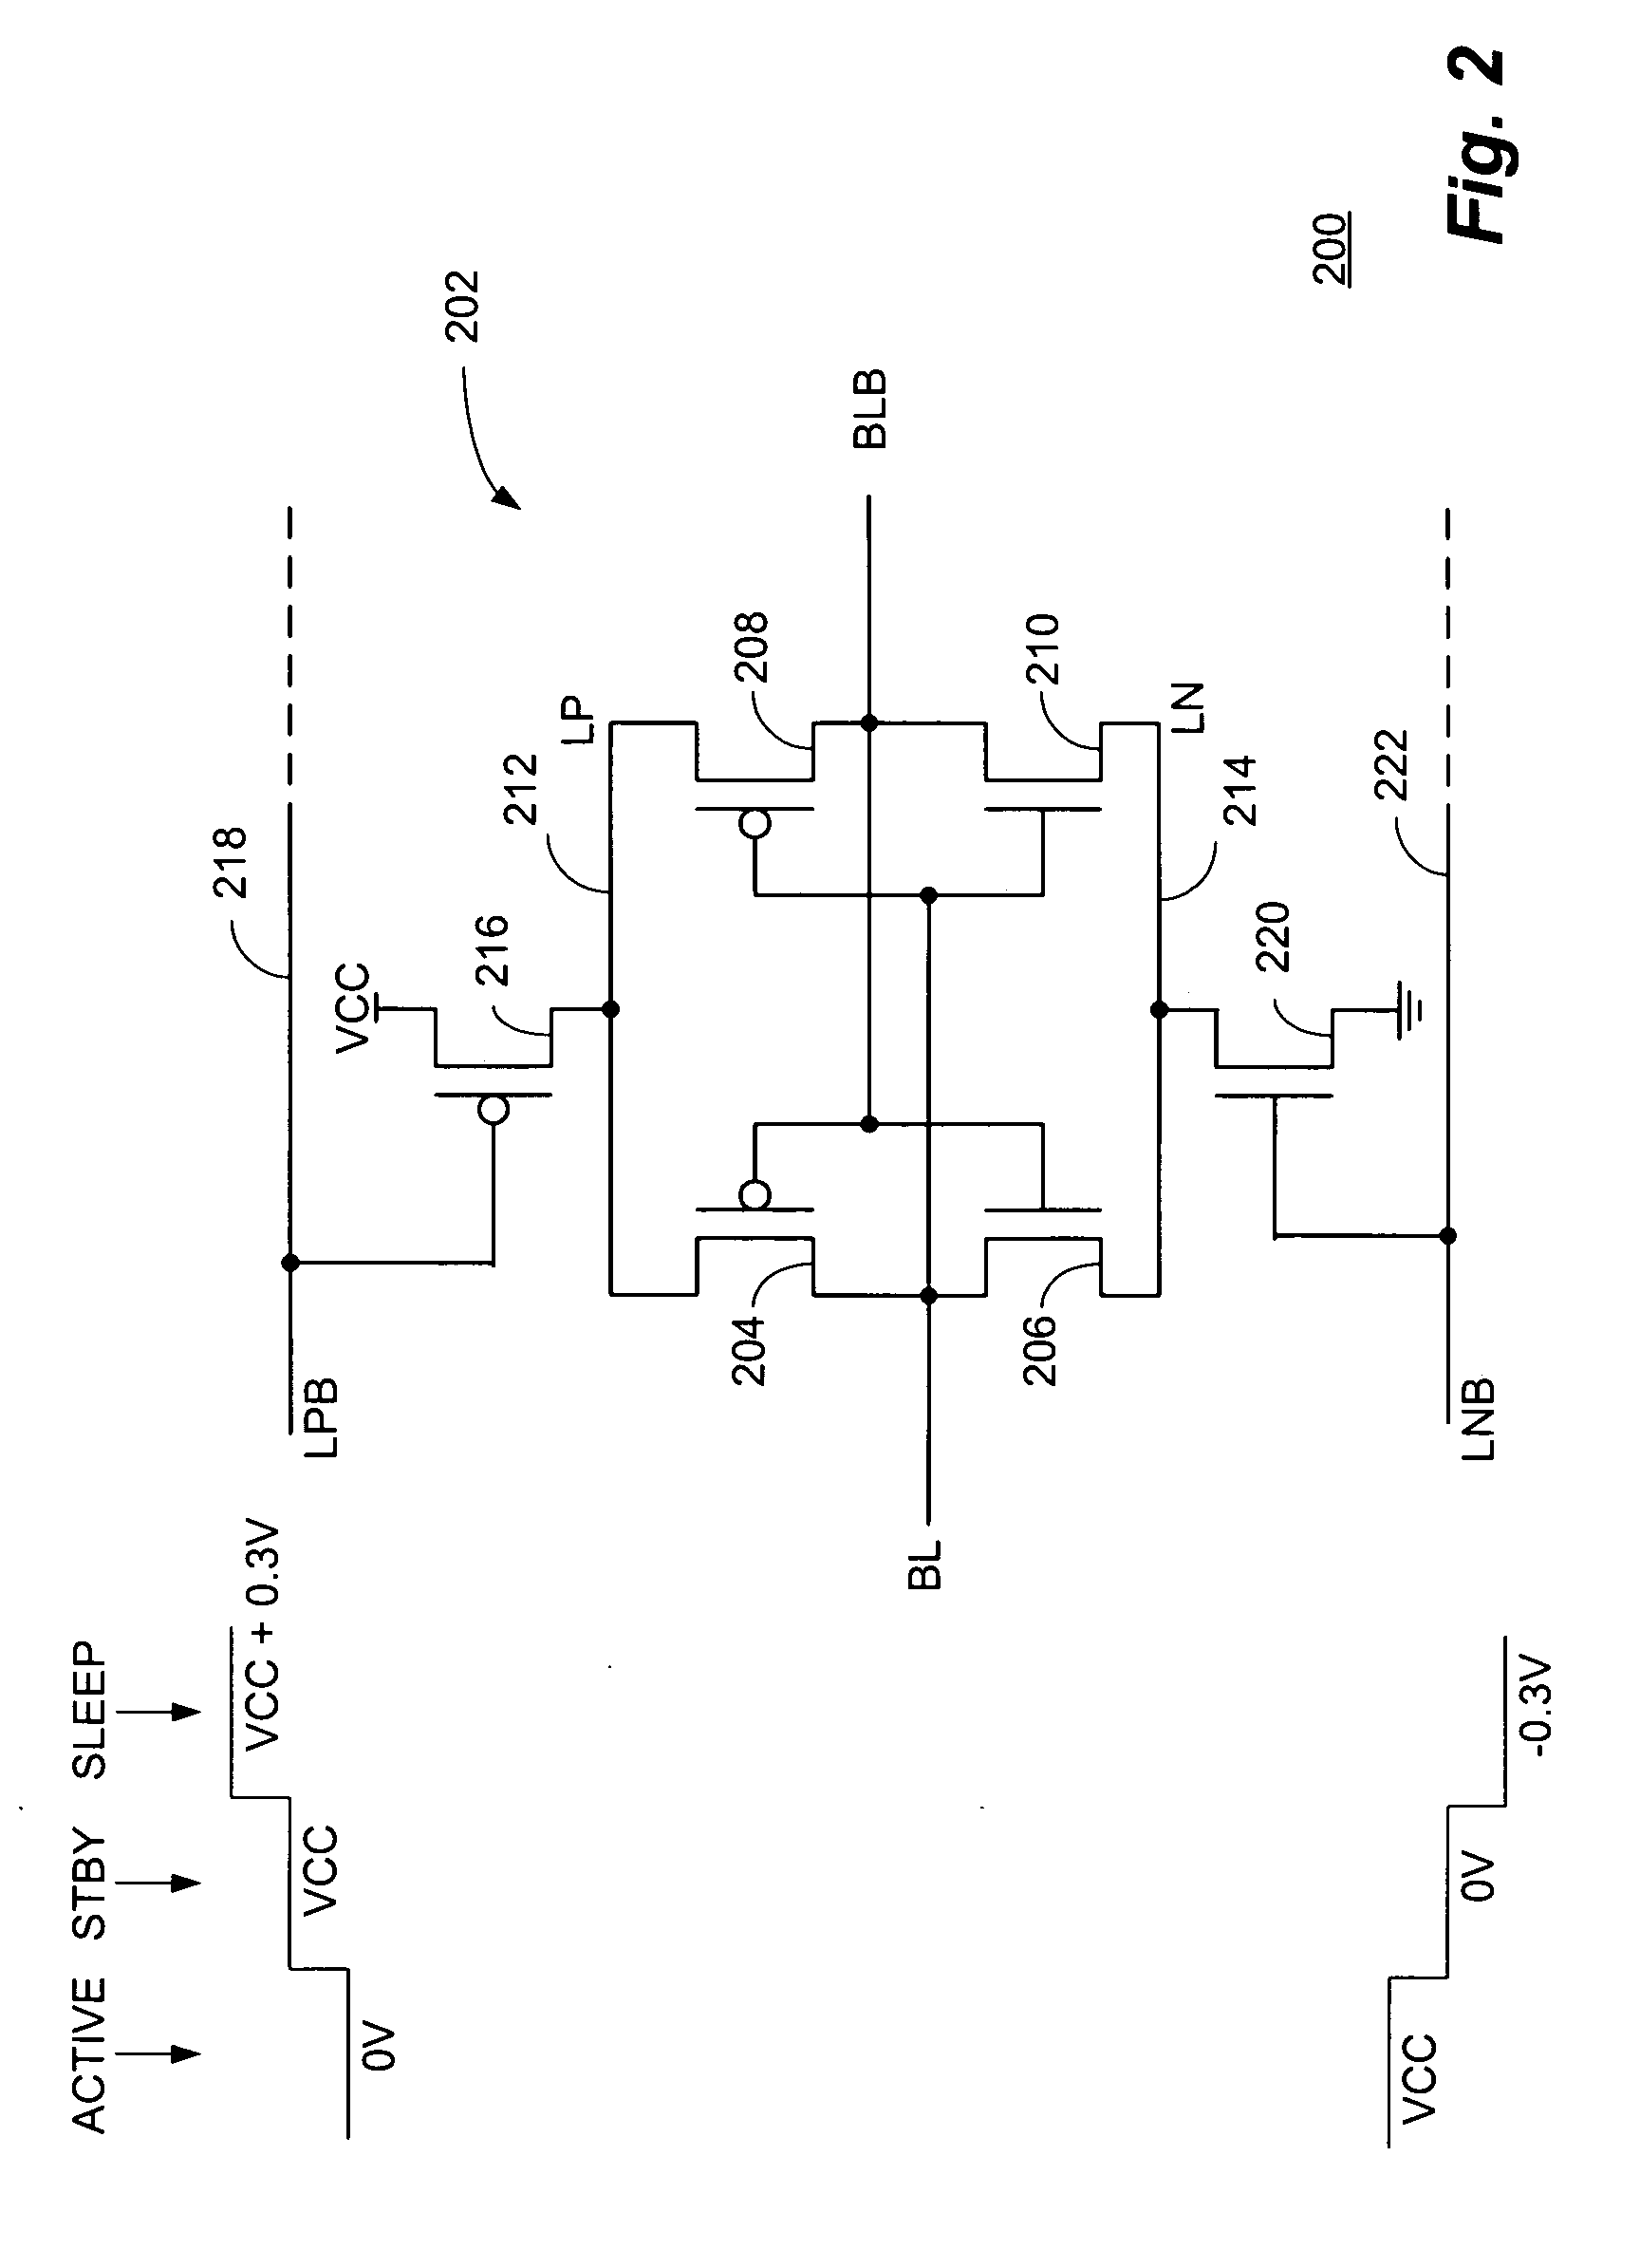 Sense amplifier power-gating technique for integrated circuit memory devices and those devices incorporating embedded dynamic random access memory (DRAM)